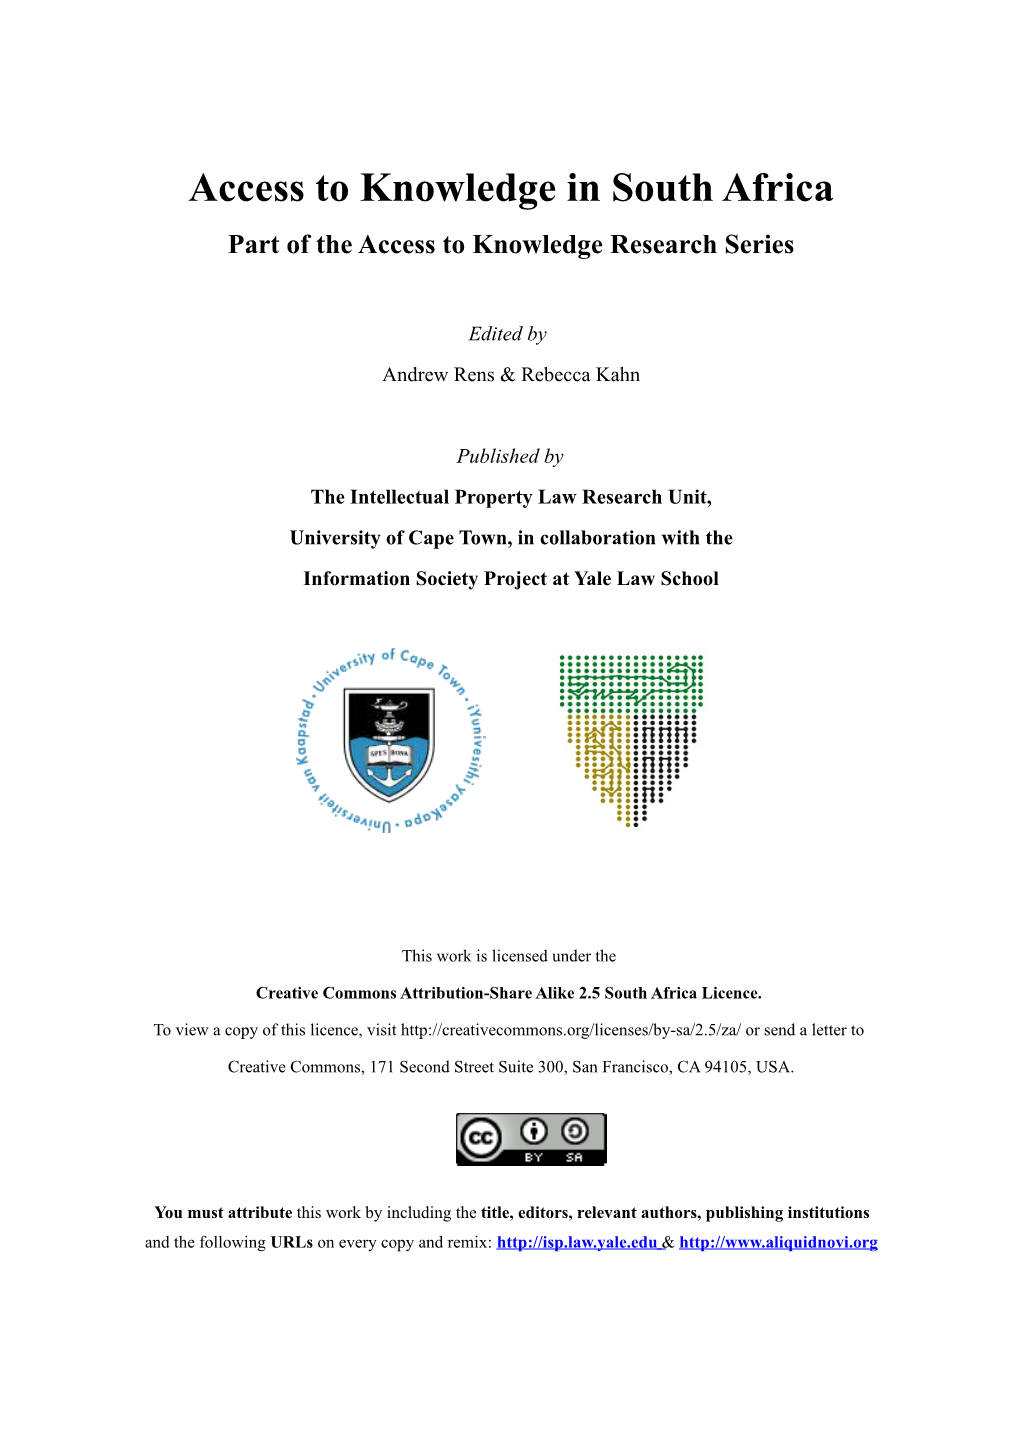 Access to Knowledge in South Africa Part of the Access to Knowledge Research Series